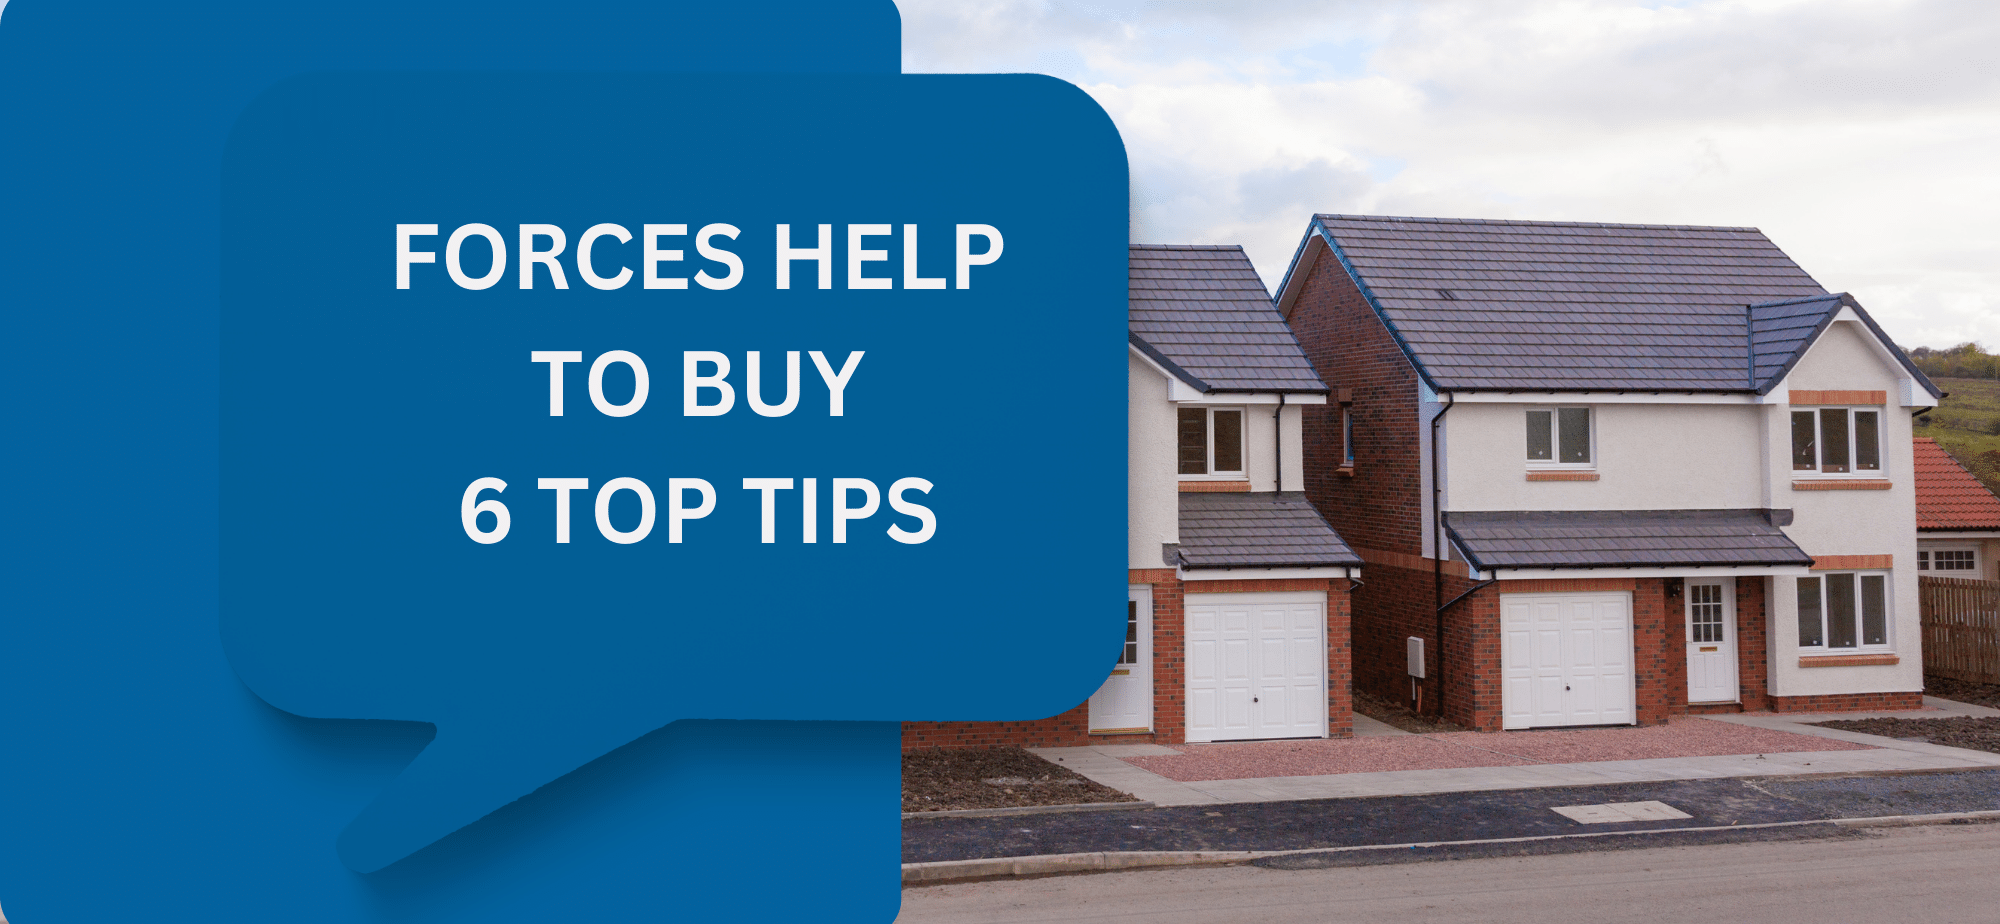 Forces Help to Buy 6 Top Tips